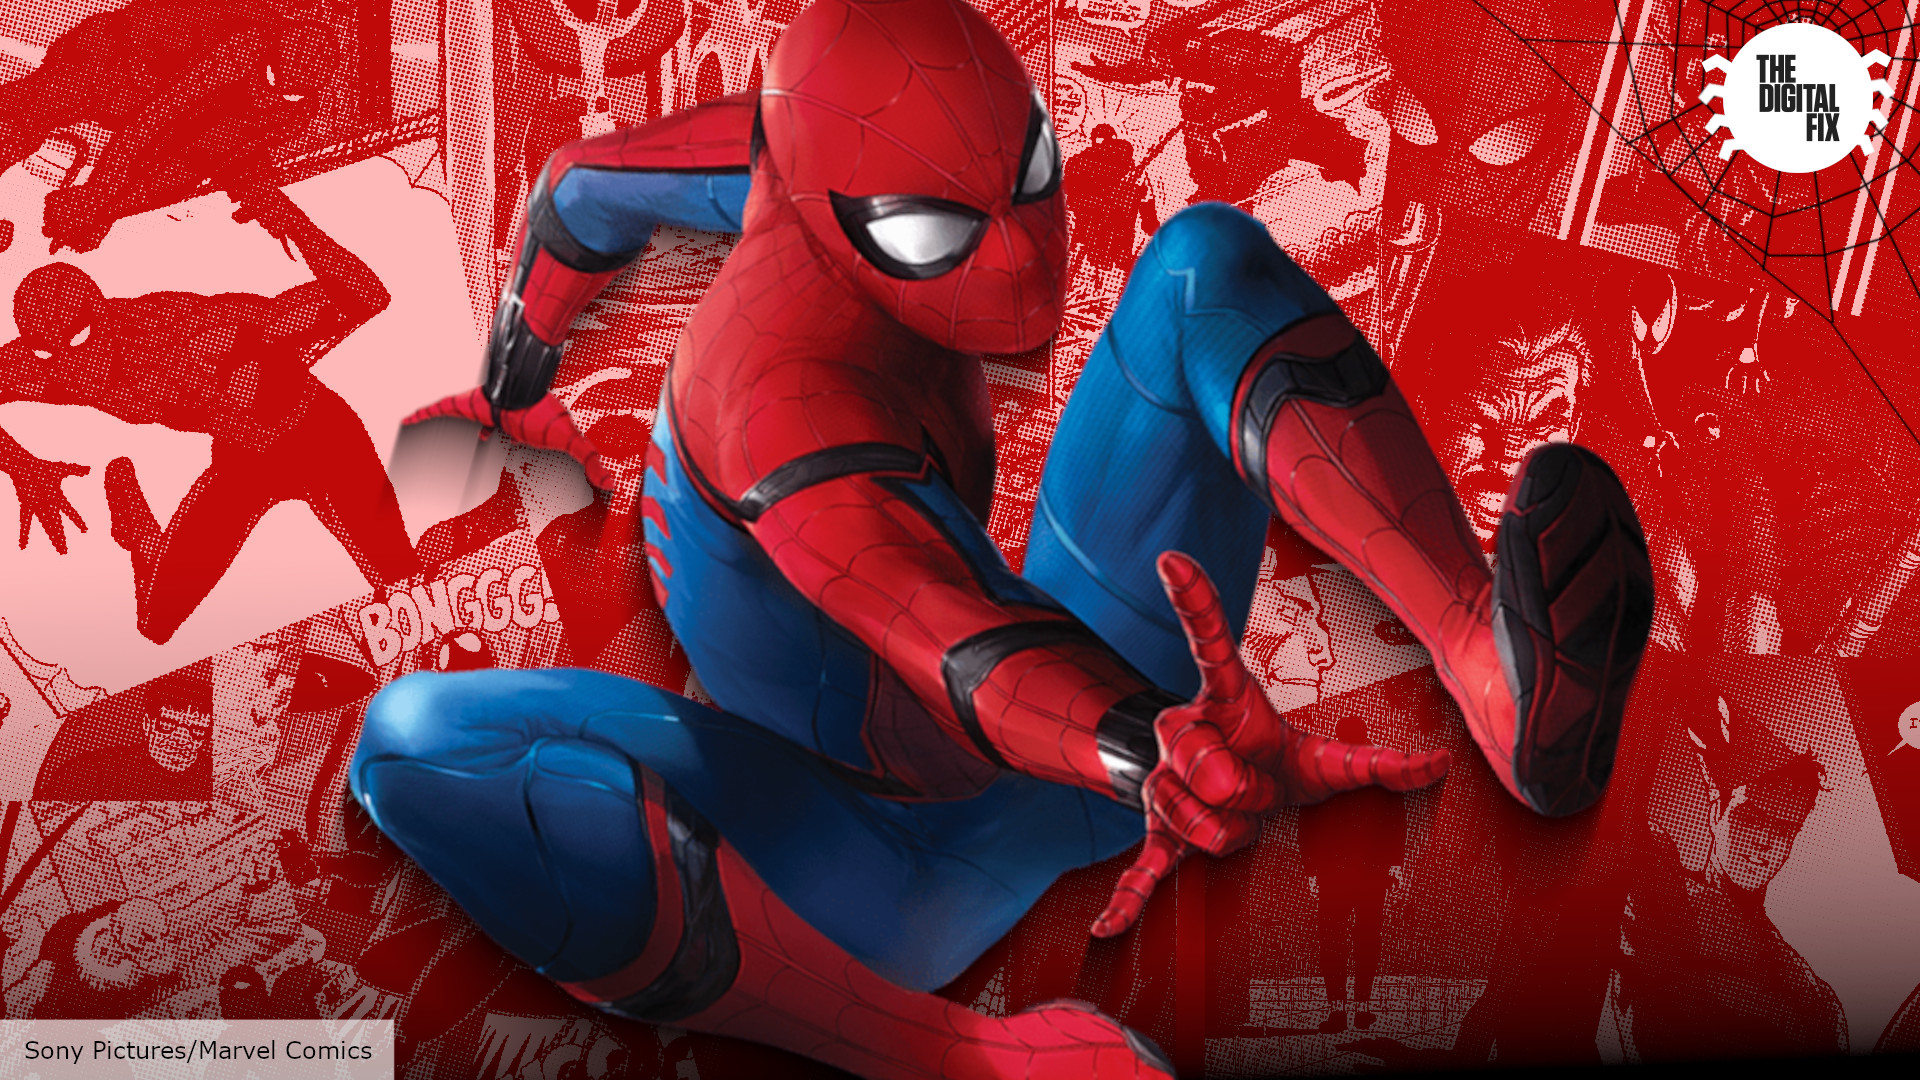 SpiderMan 4 release date speculation, cast, plot, and more news